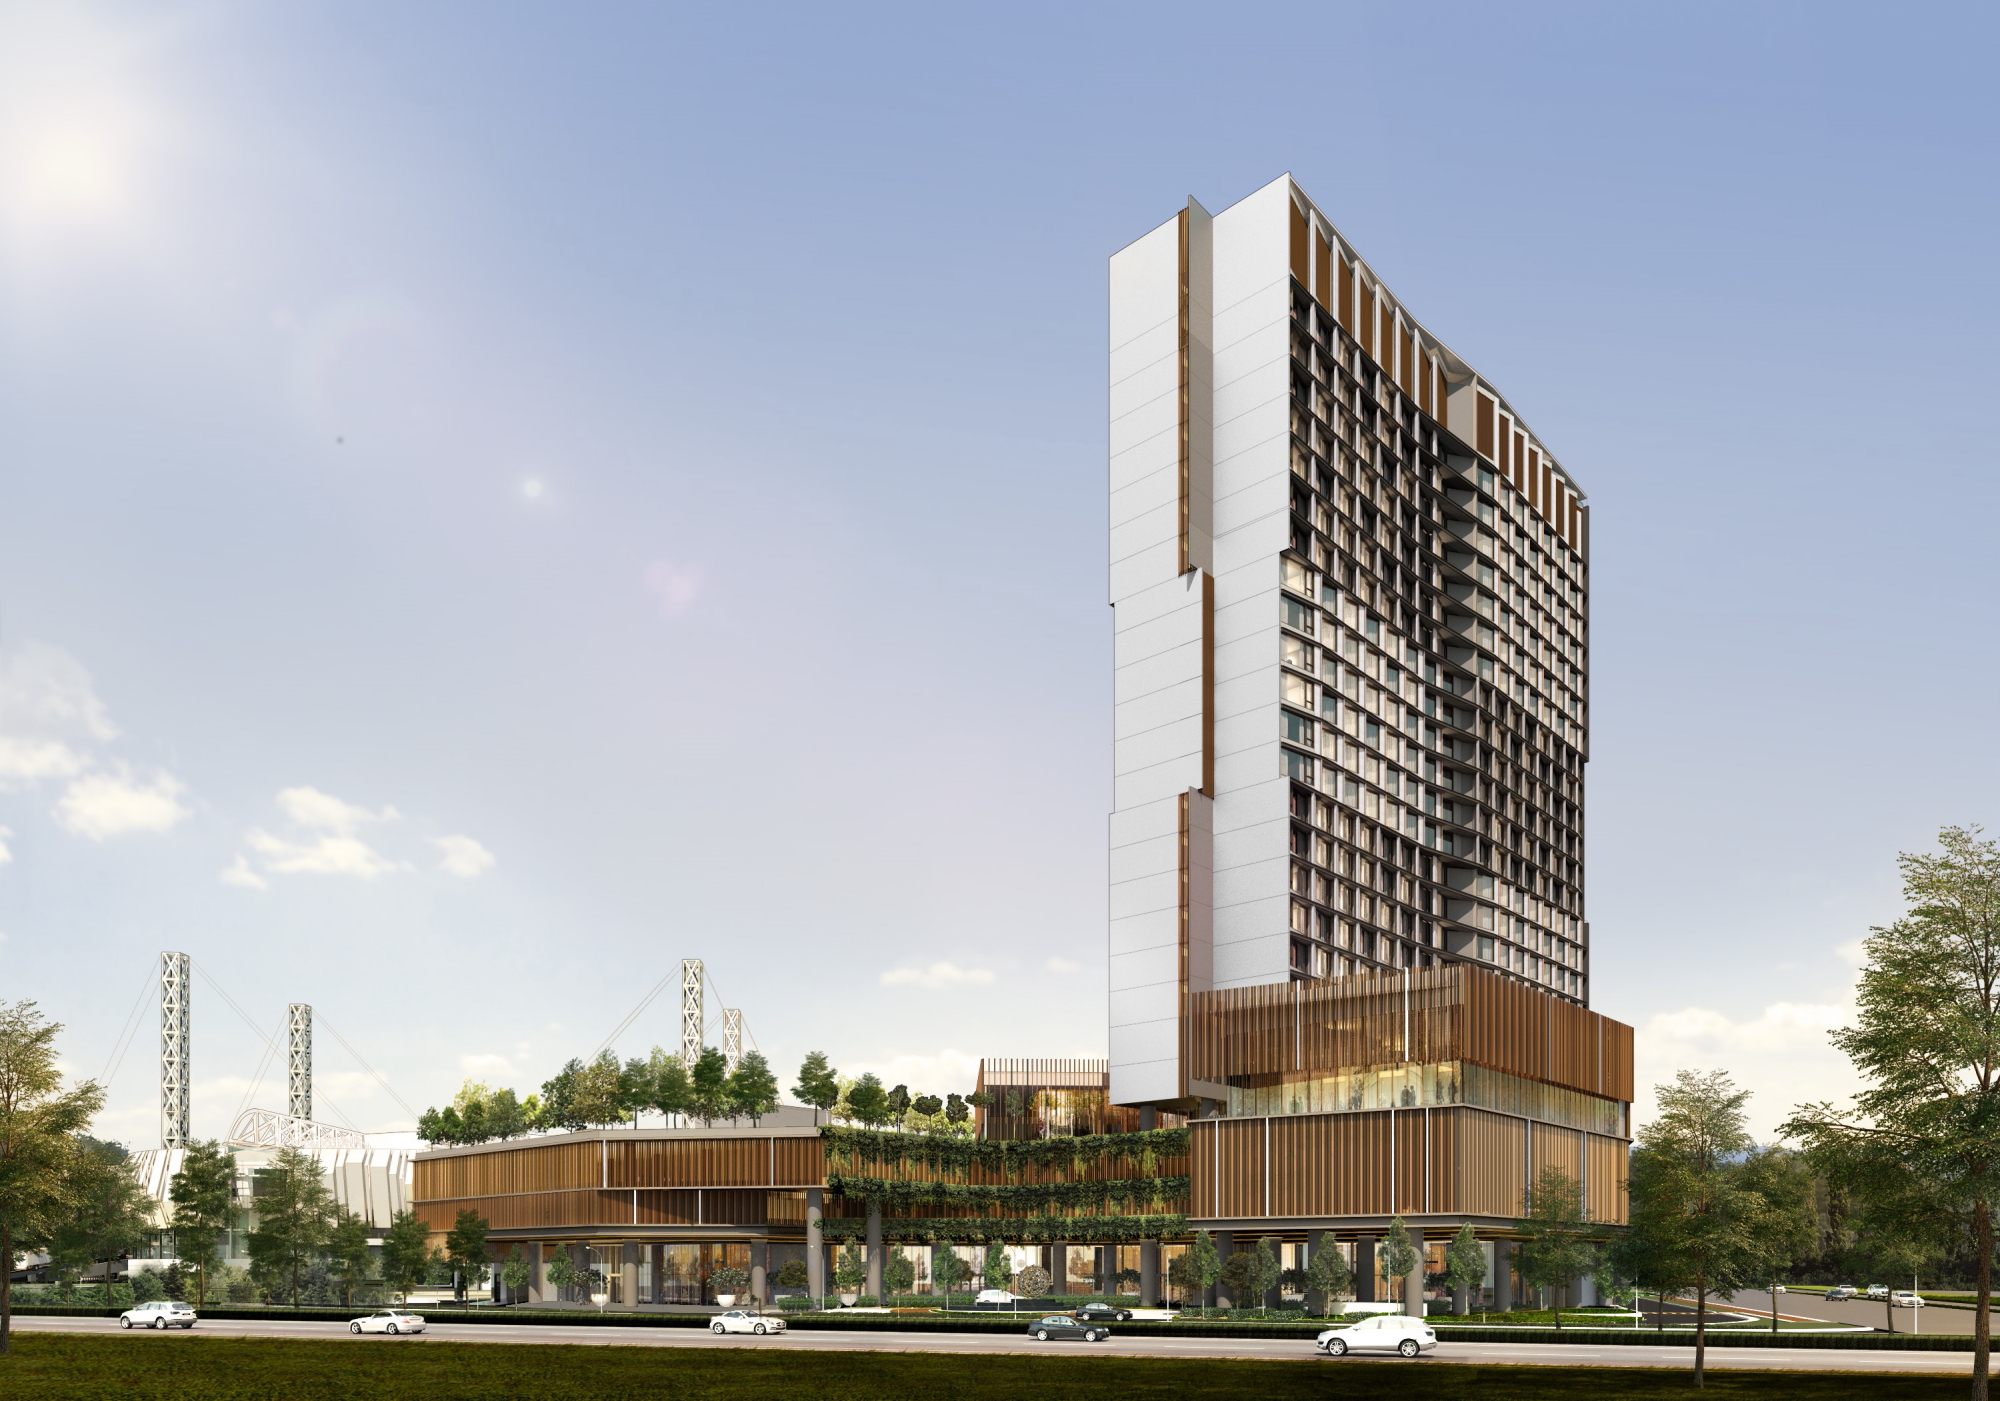 Onyx Hospitality Group has signed agreements with SP Setia Berhad, one of Malaysia’s leading property developers, to open two new Amari hotels in Kuala Lumpur and Penang. Click to enlarge.